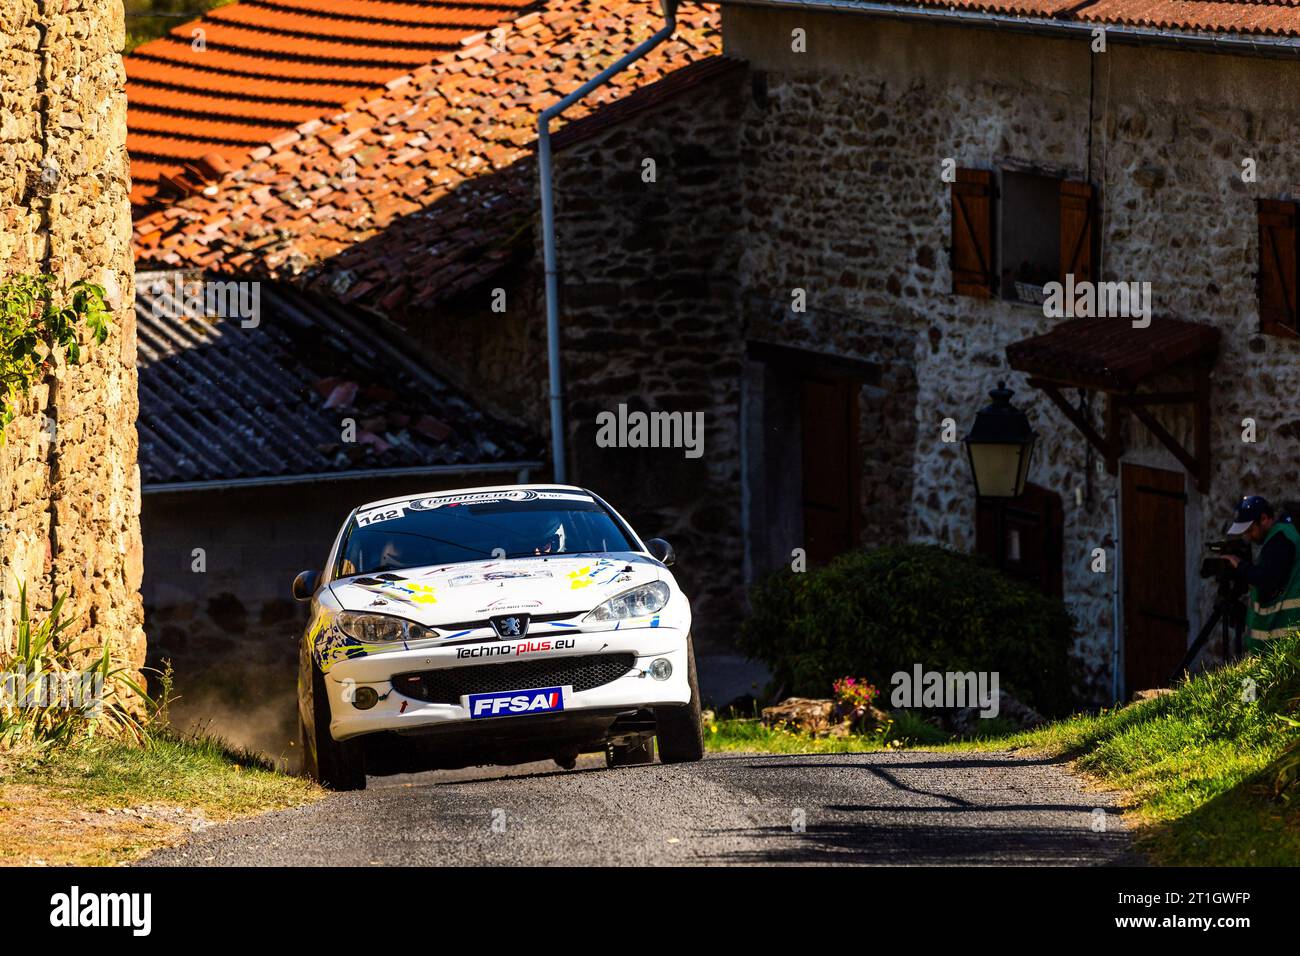 Ambert, France. 13th Oct, 2023. 142 GENELLE Alexis, LECLERC Edouard, Peugeot 206 RC A7, action during the Finale de la Coupe de France des Rallyes Ambert 2023, from October 12 au 14, 2023 in Ambert, France - Photo Damien Saulnier/DPPI Credit: DPPI Media/Alamy Live News Stock Photo